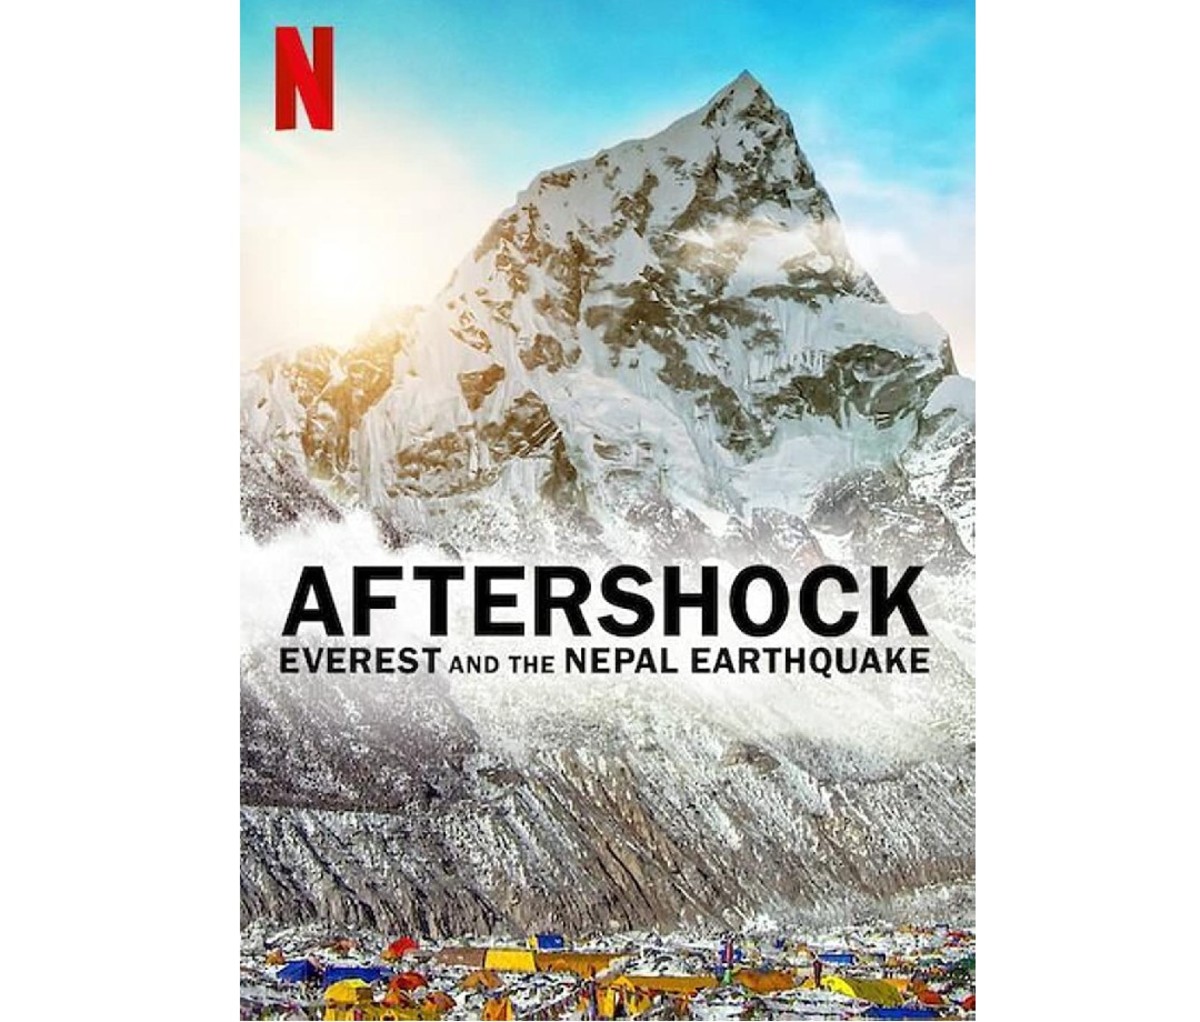 Movie poster for Netflix's 'Aftershock: Everest and the Nepal Earthquake.